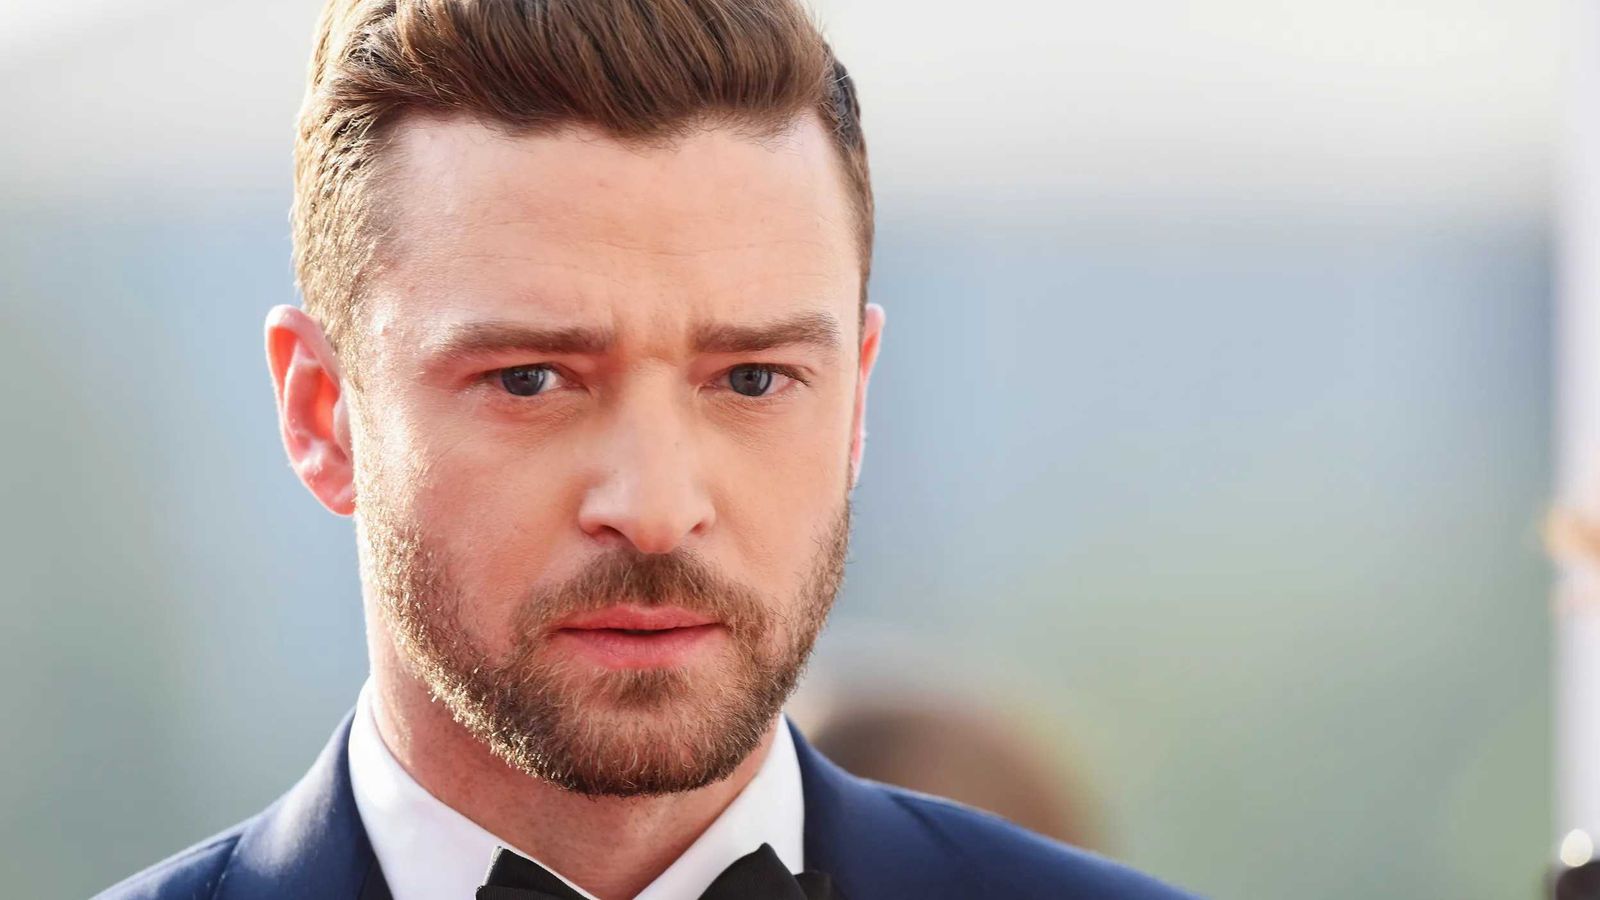 'OK, well you know, you can't change what’s happened': Justin Timberlake's 143.6 million viewer Super Bowl scandal revisited